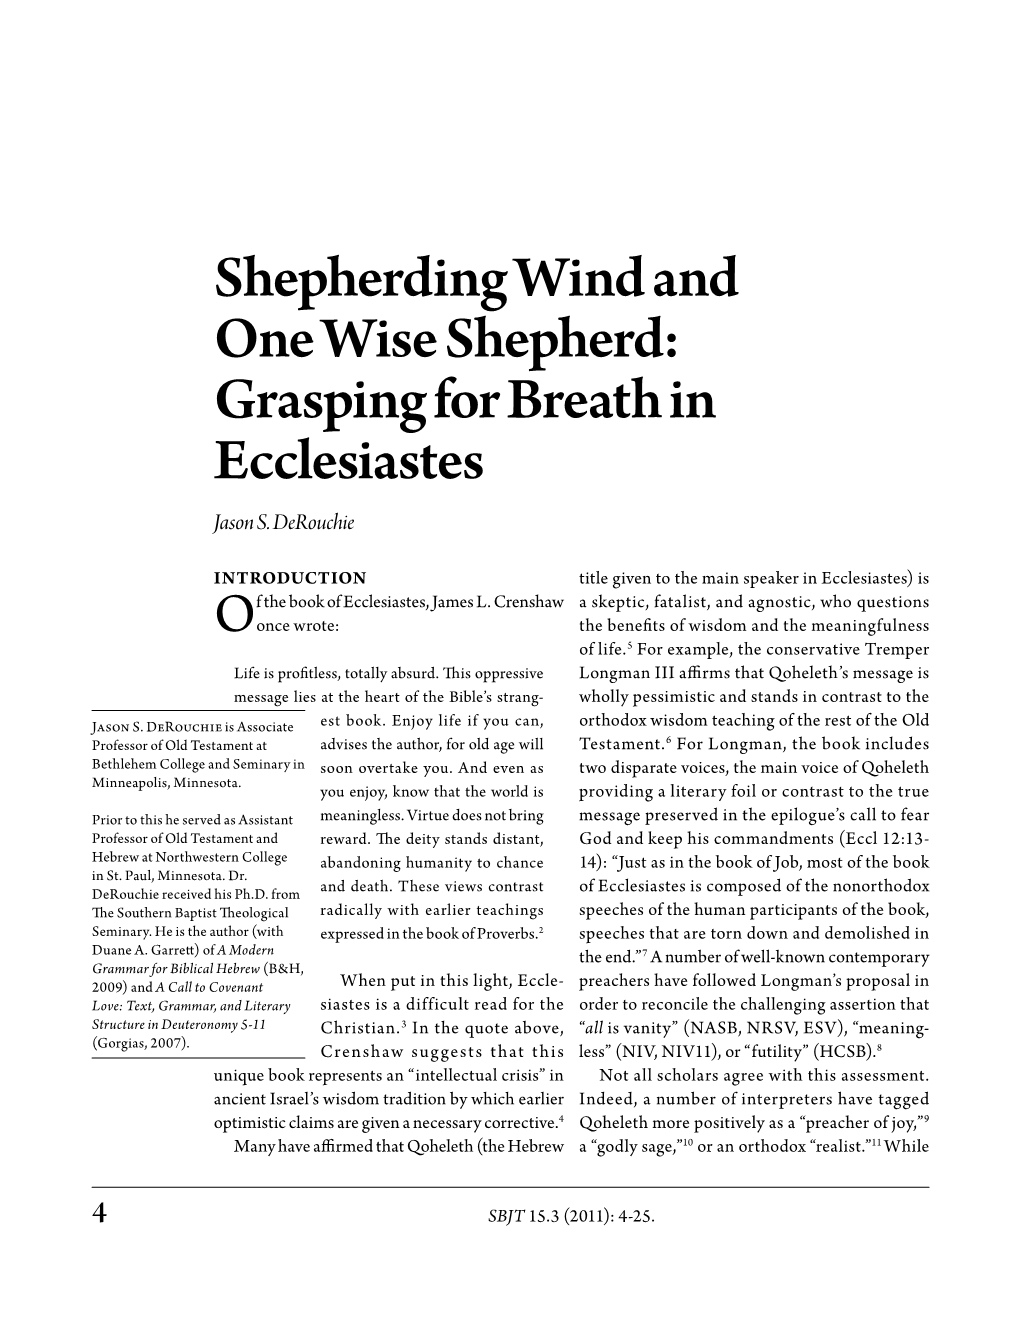 Shepherding Wind and One Wise Shepherd: Grasping for Breath in Ecclesiastes Jason S